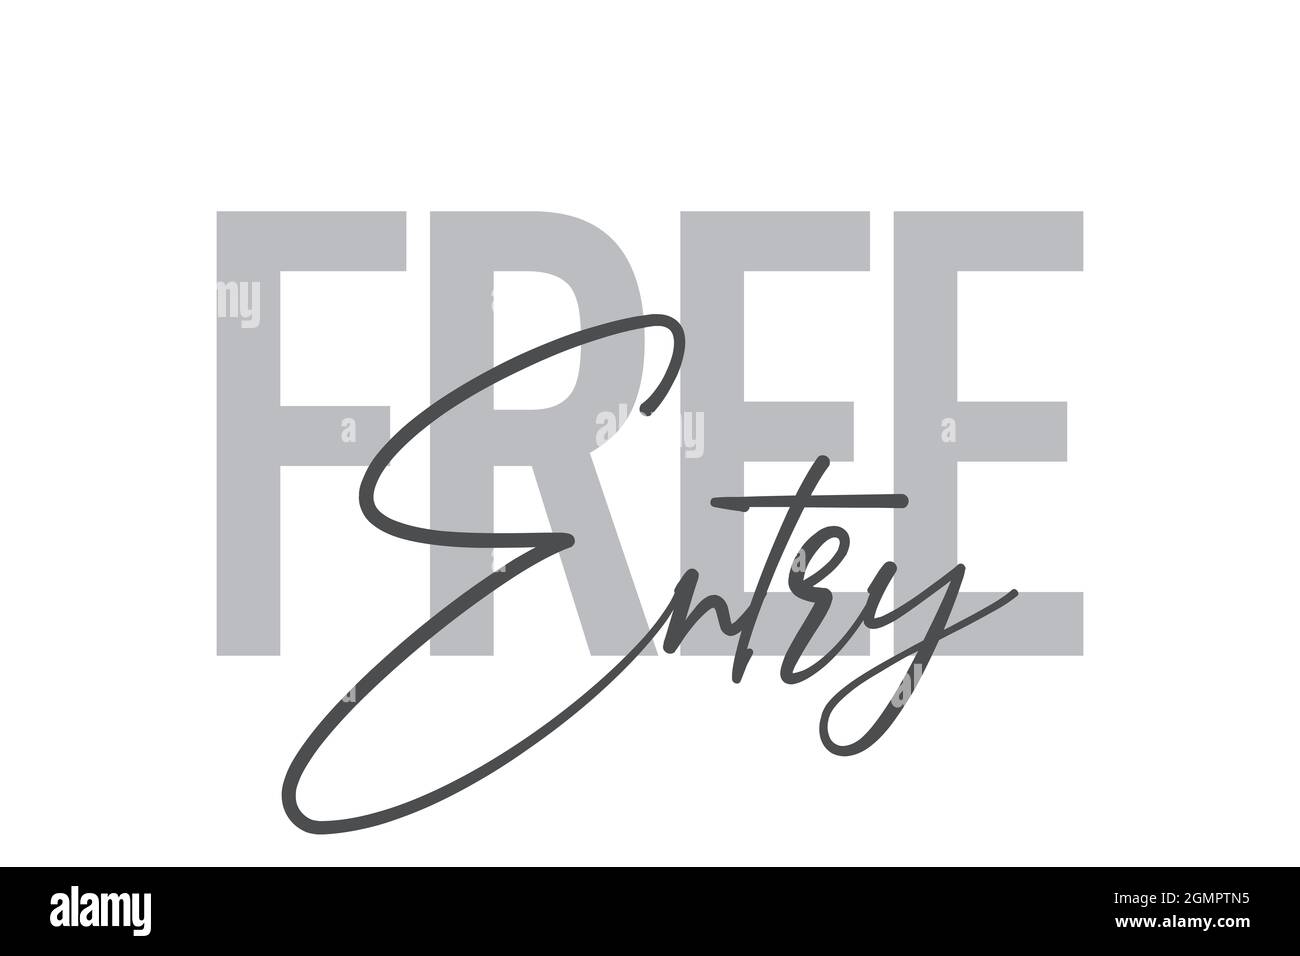 Modern, simple, minimal typographic design of a saying 'Free Entry' in tones of grey color. Cool, urban, trendy and playful graphic vector art with ha Stock Photo